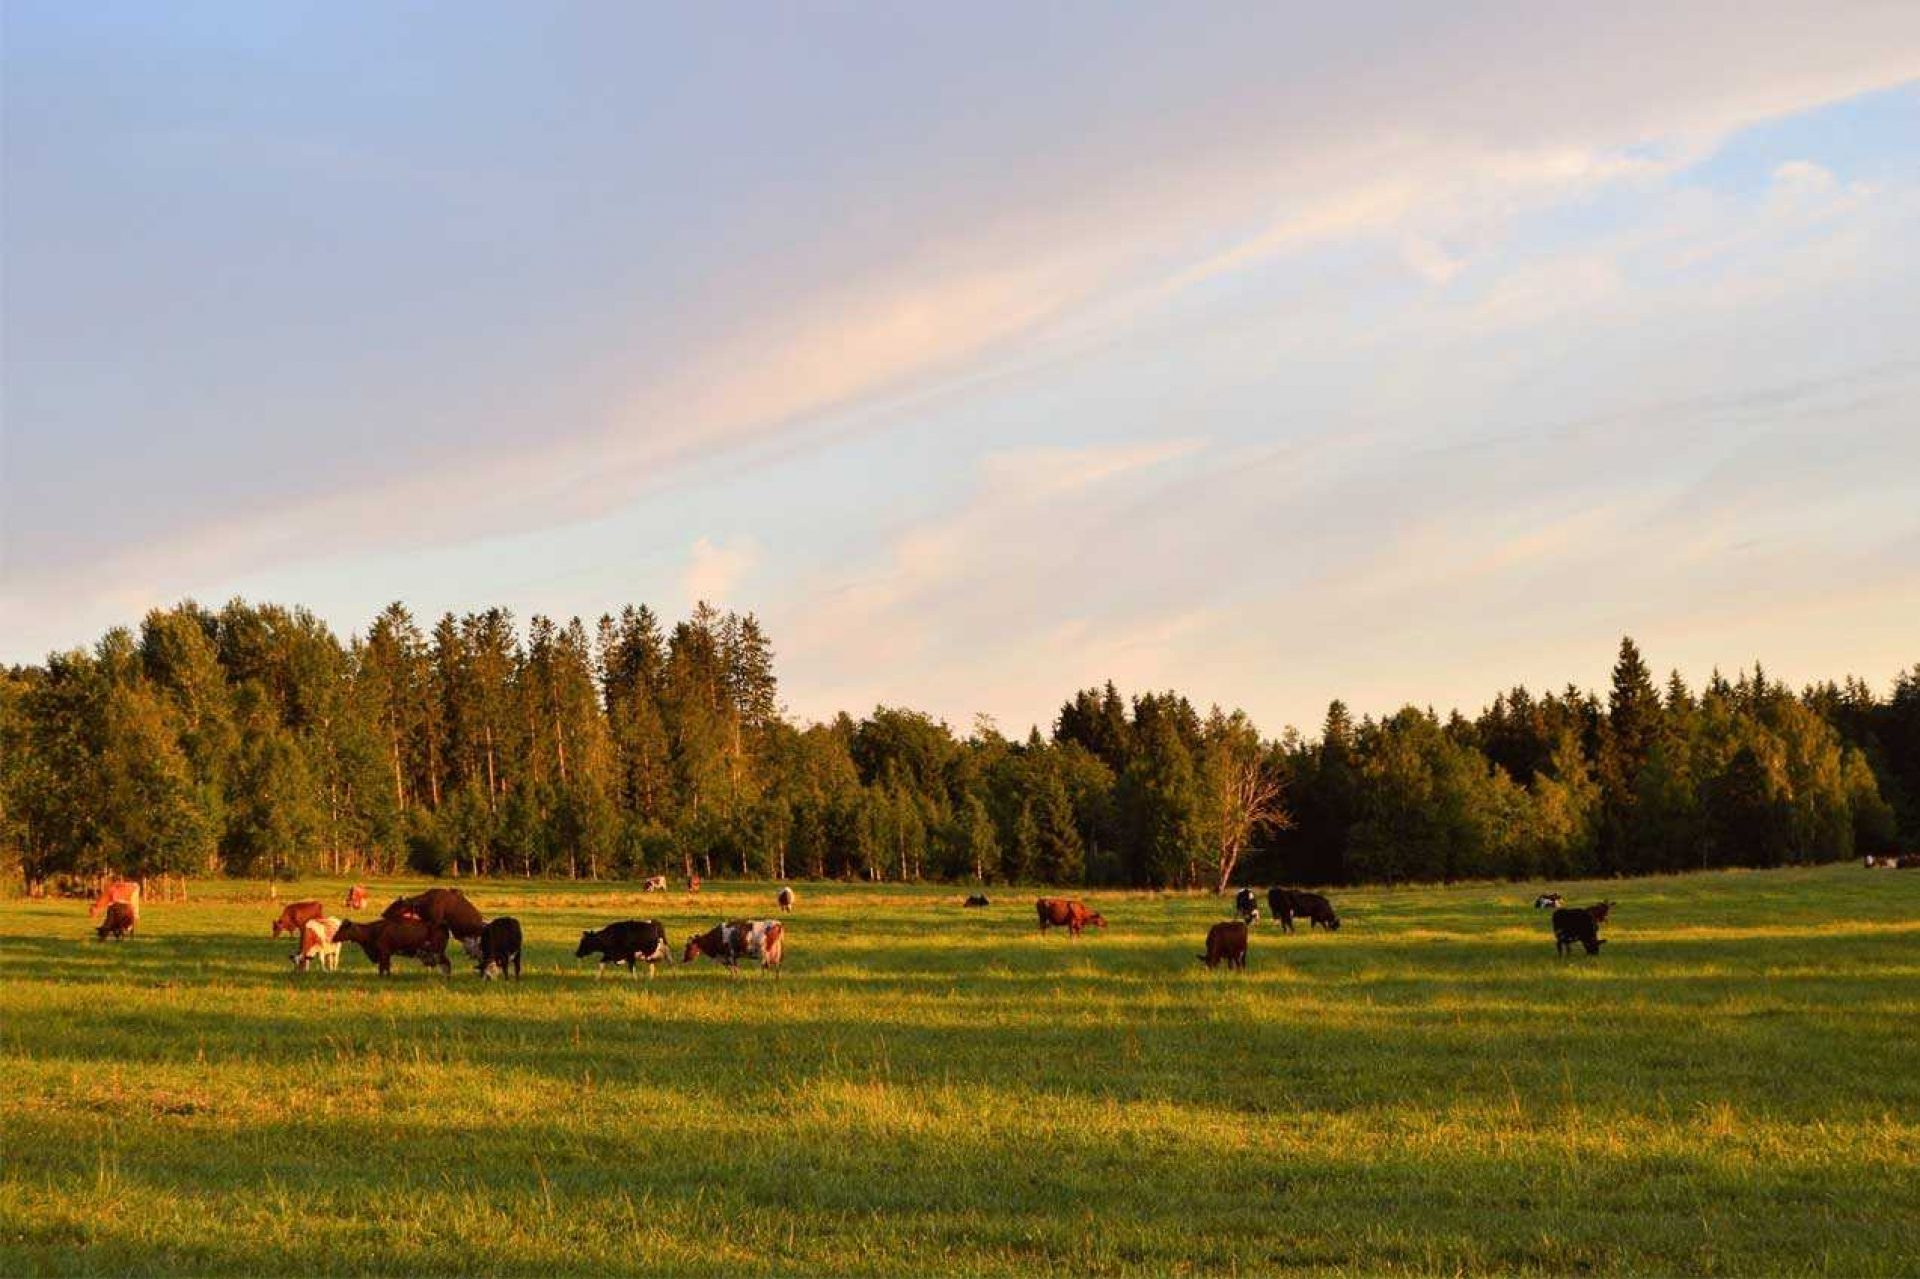 Cattle grazing in grass field with trees in the background